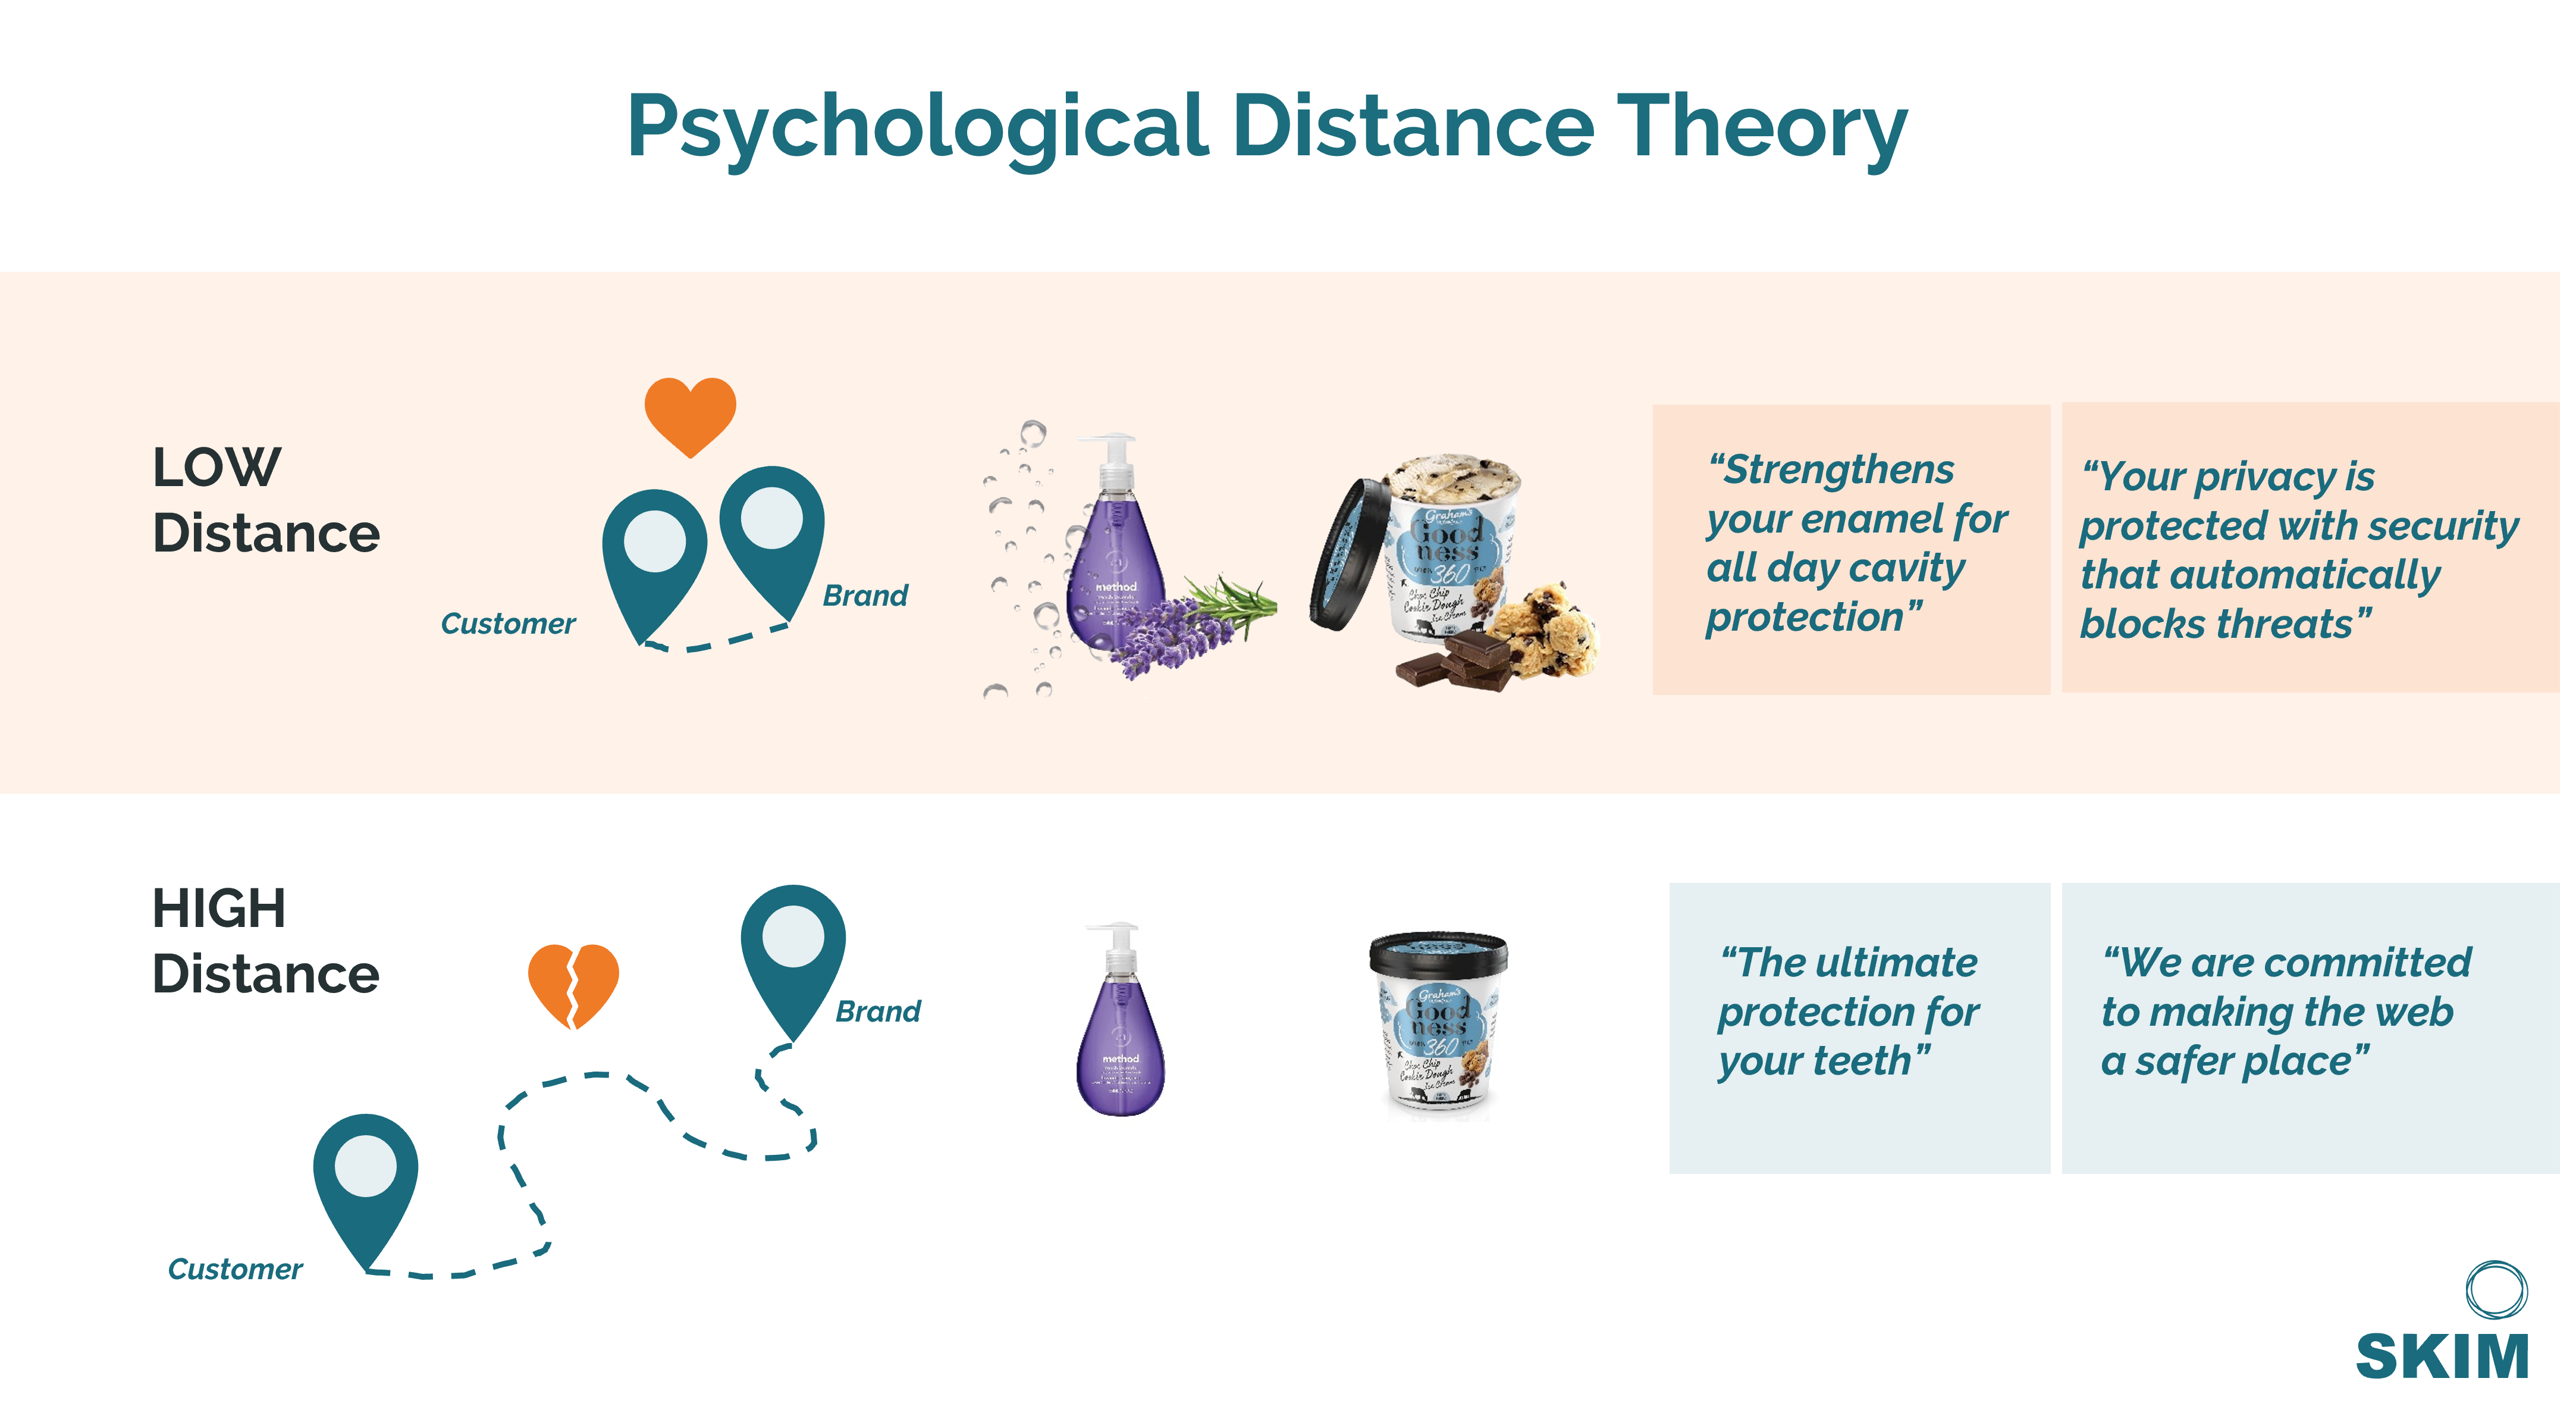 Psychological distance theory in practice